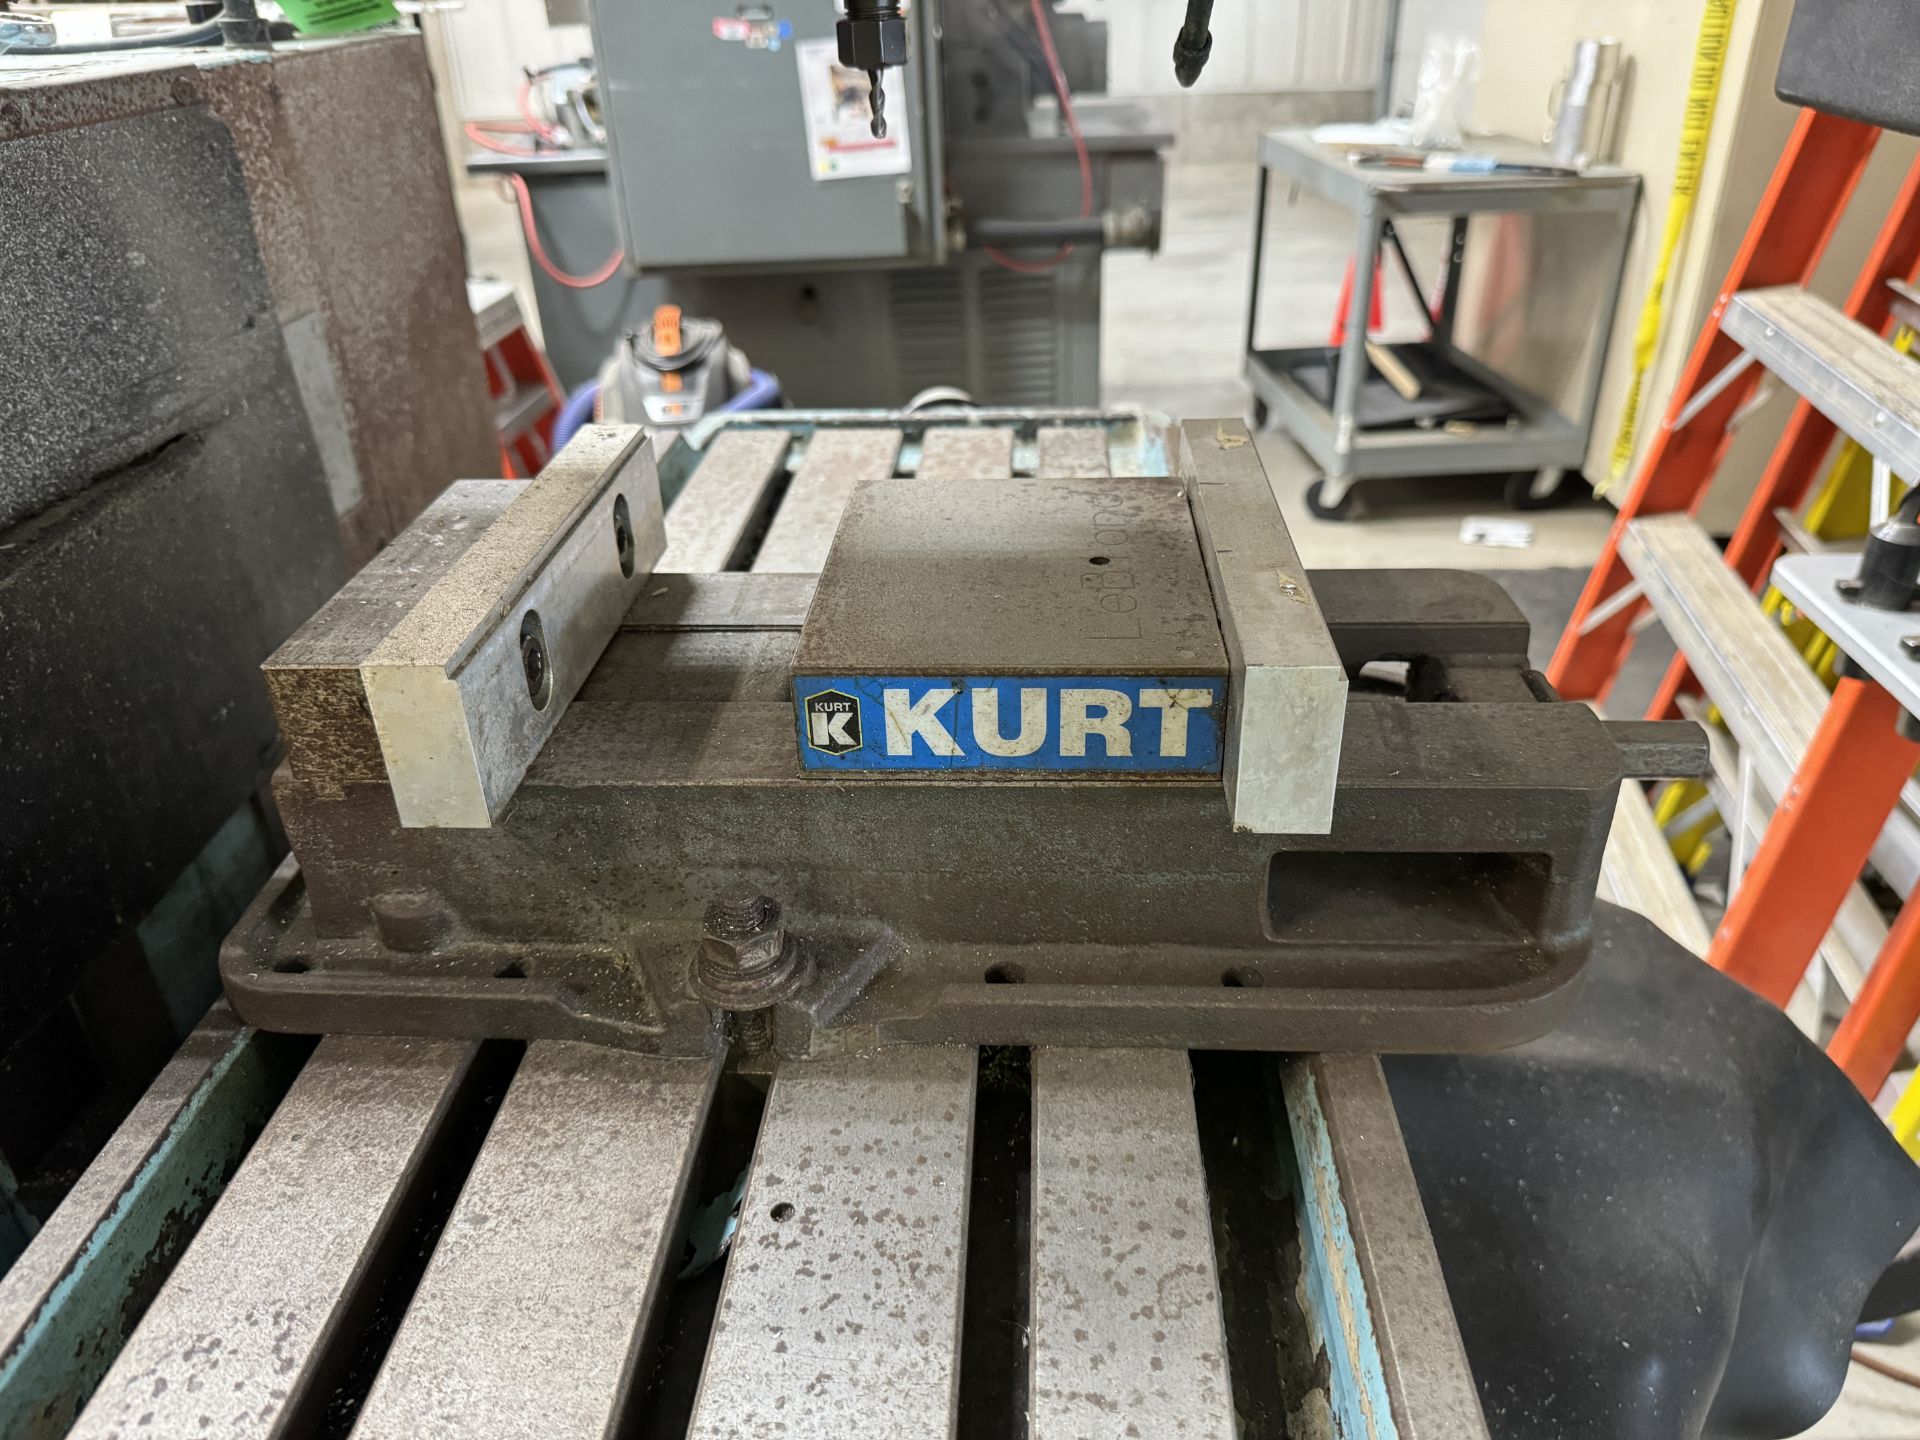 HURCO KM-3 3-AXIS CNC KNEE MILL WITH HURCO ULTIMAX KM-3P CONTROL INCLUDES TOOLING AND KURT VISE - Bild 6 aus 9